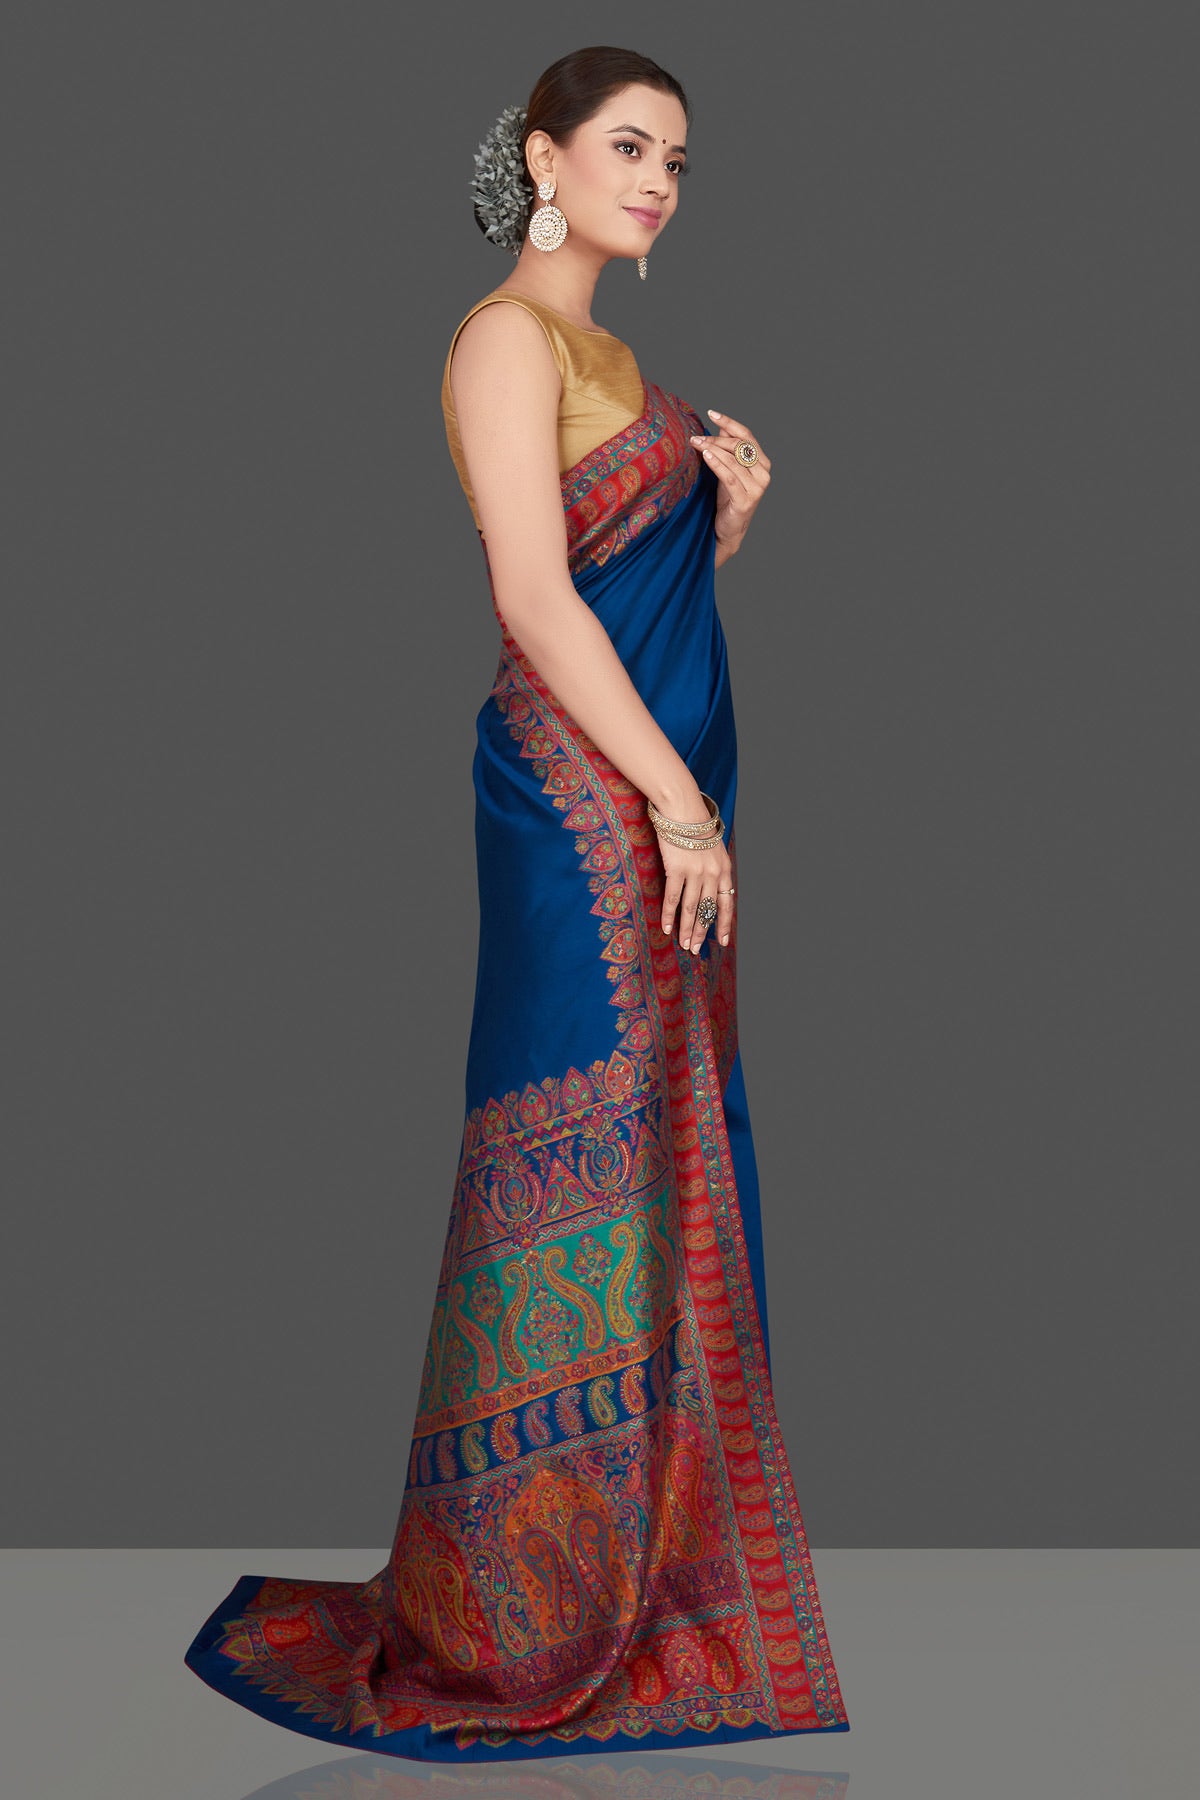 Shop beautiful indigo blue silk saree online in USA with red Kani embroidery border. Get ready for festive occasions and weddings in tasteful designer sarees, Banarasi sarees, handwoven sarees from Pure Elegance Indian clothing store in USA.-side